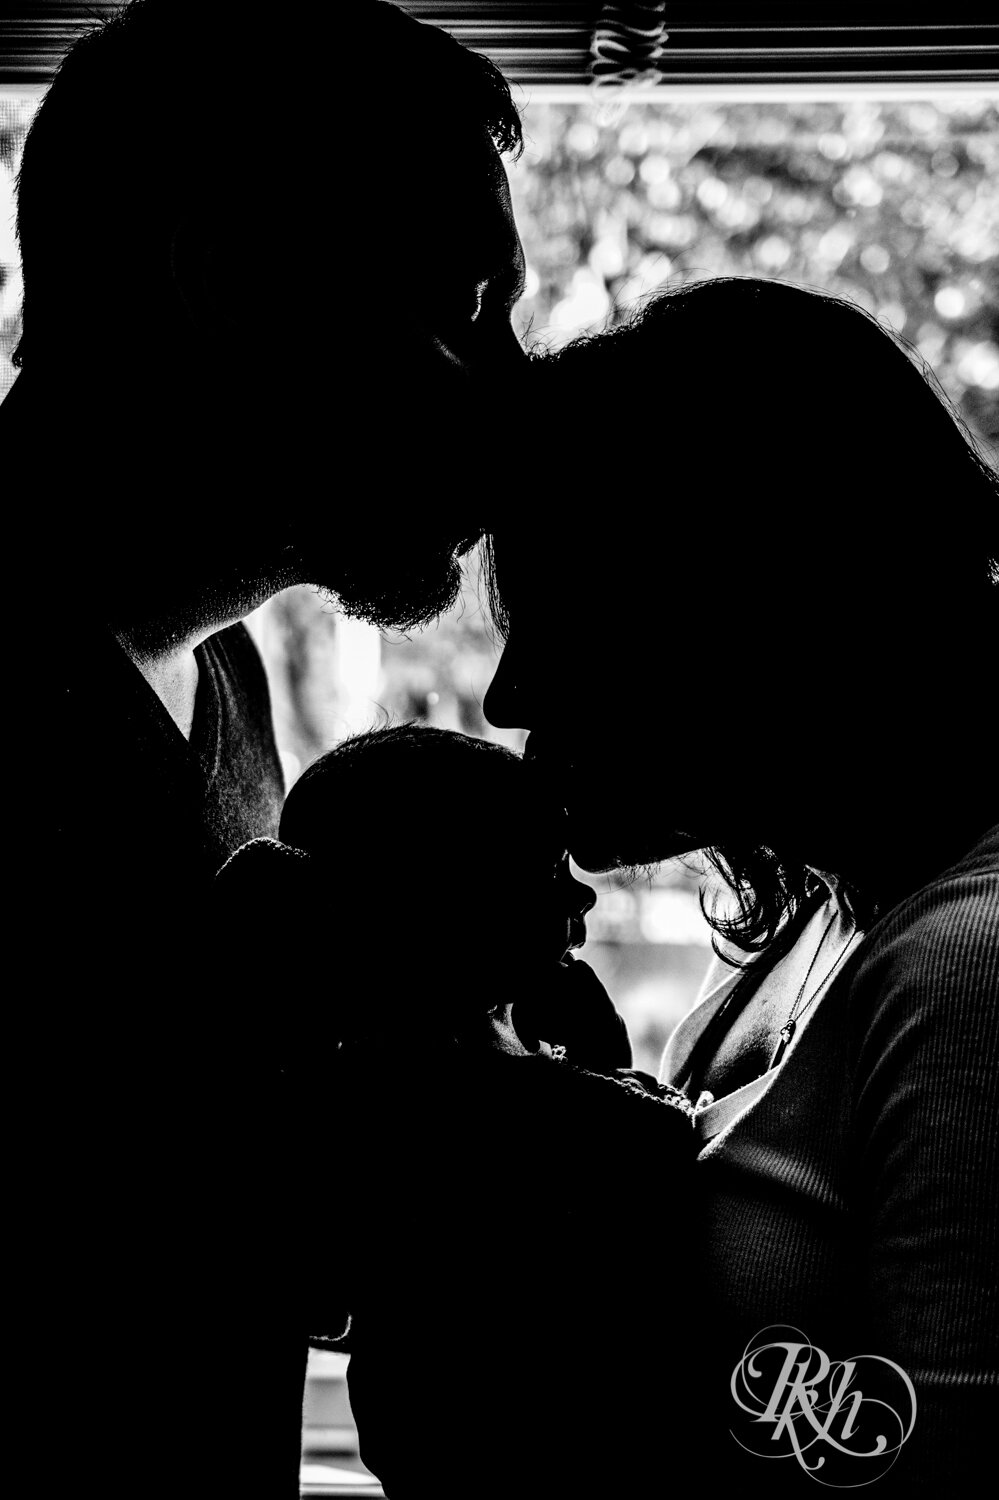 Mom and dad kiss in silhouette with baby between them in Minnesota.